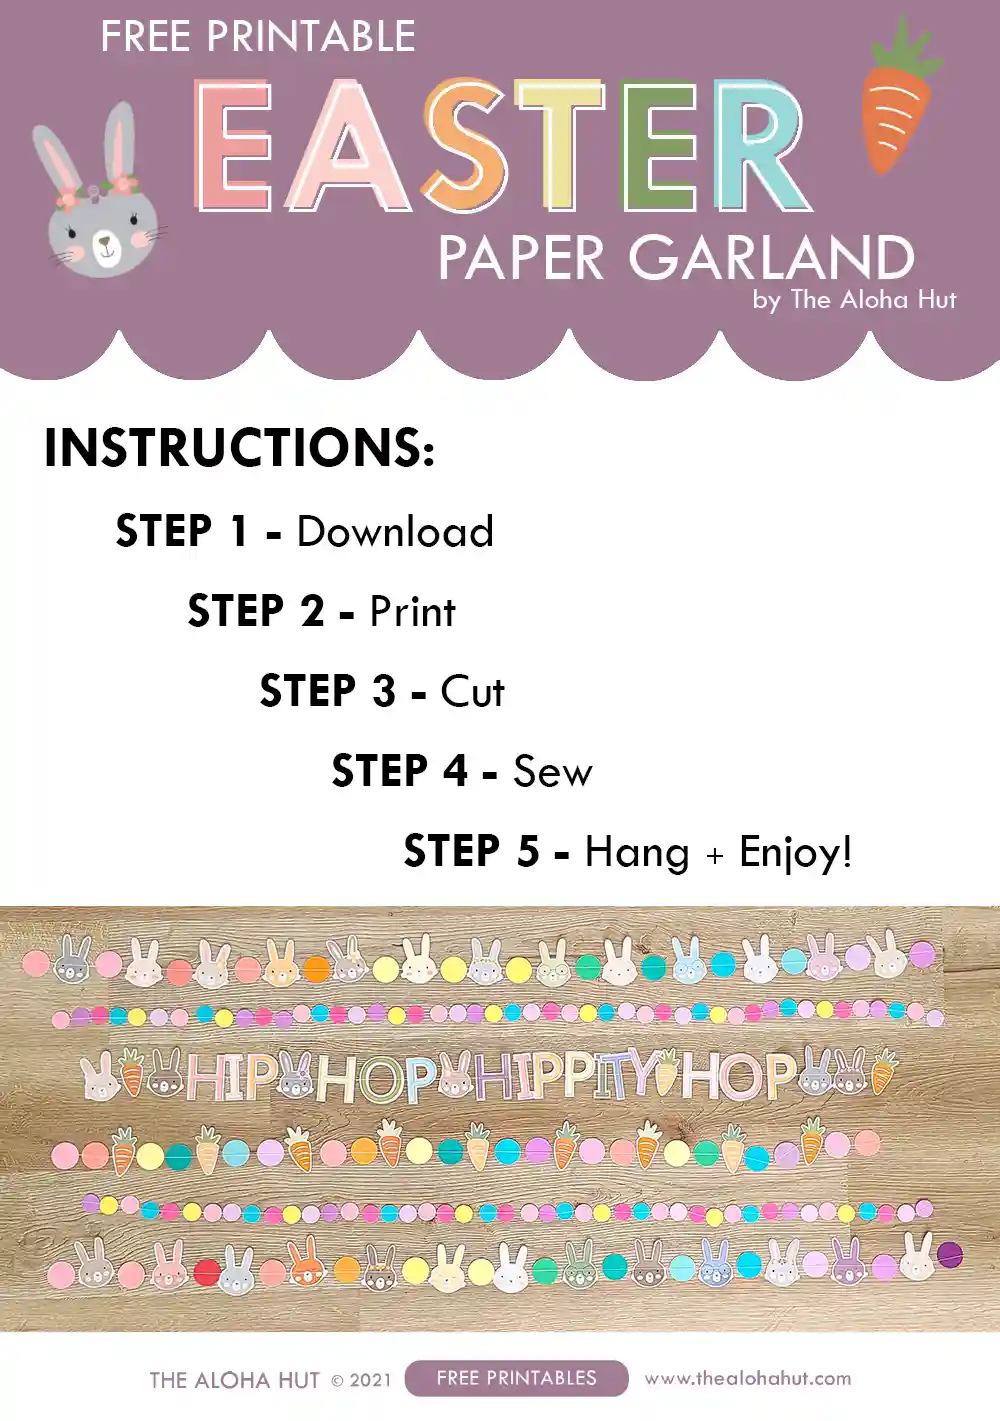 Easter garlands you can print at home to add to your Easter decoration. Perfect for an Easter party or to decorate your Easter mantel for the holiday! We love these paper garlands because they're a cheap alternative to the pricey Easter felt ball garlands. Print the garlands for a fun and easy Easter garland alternative.